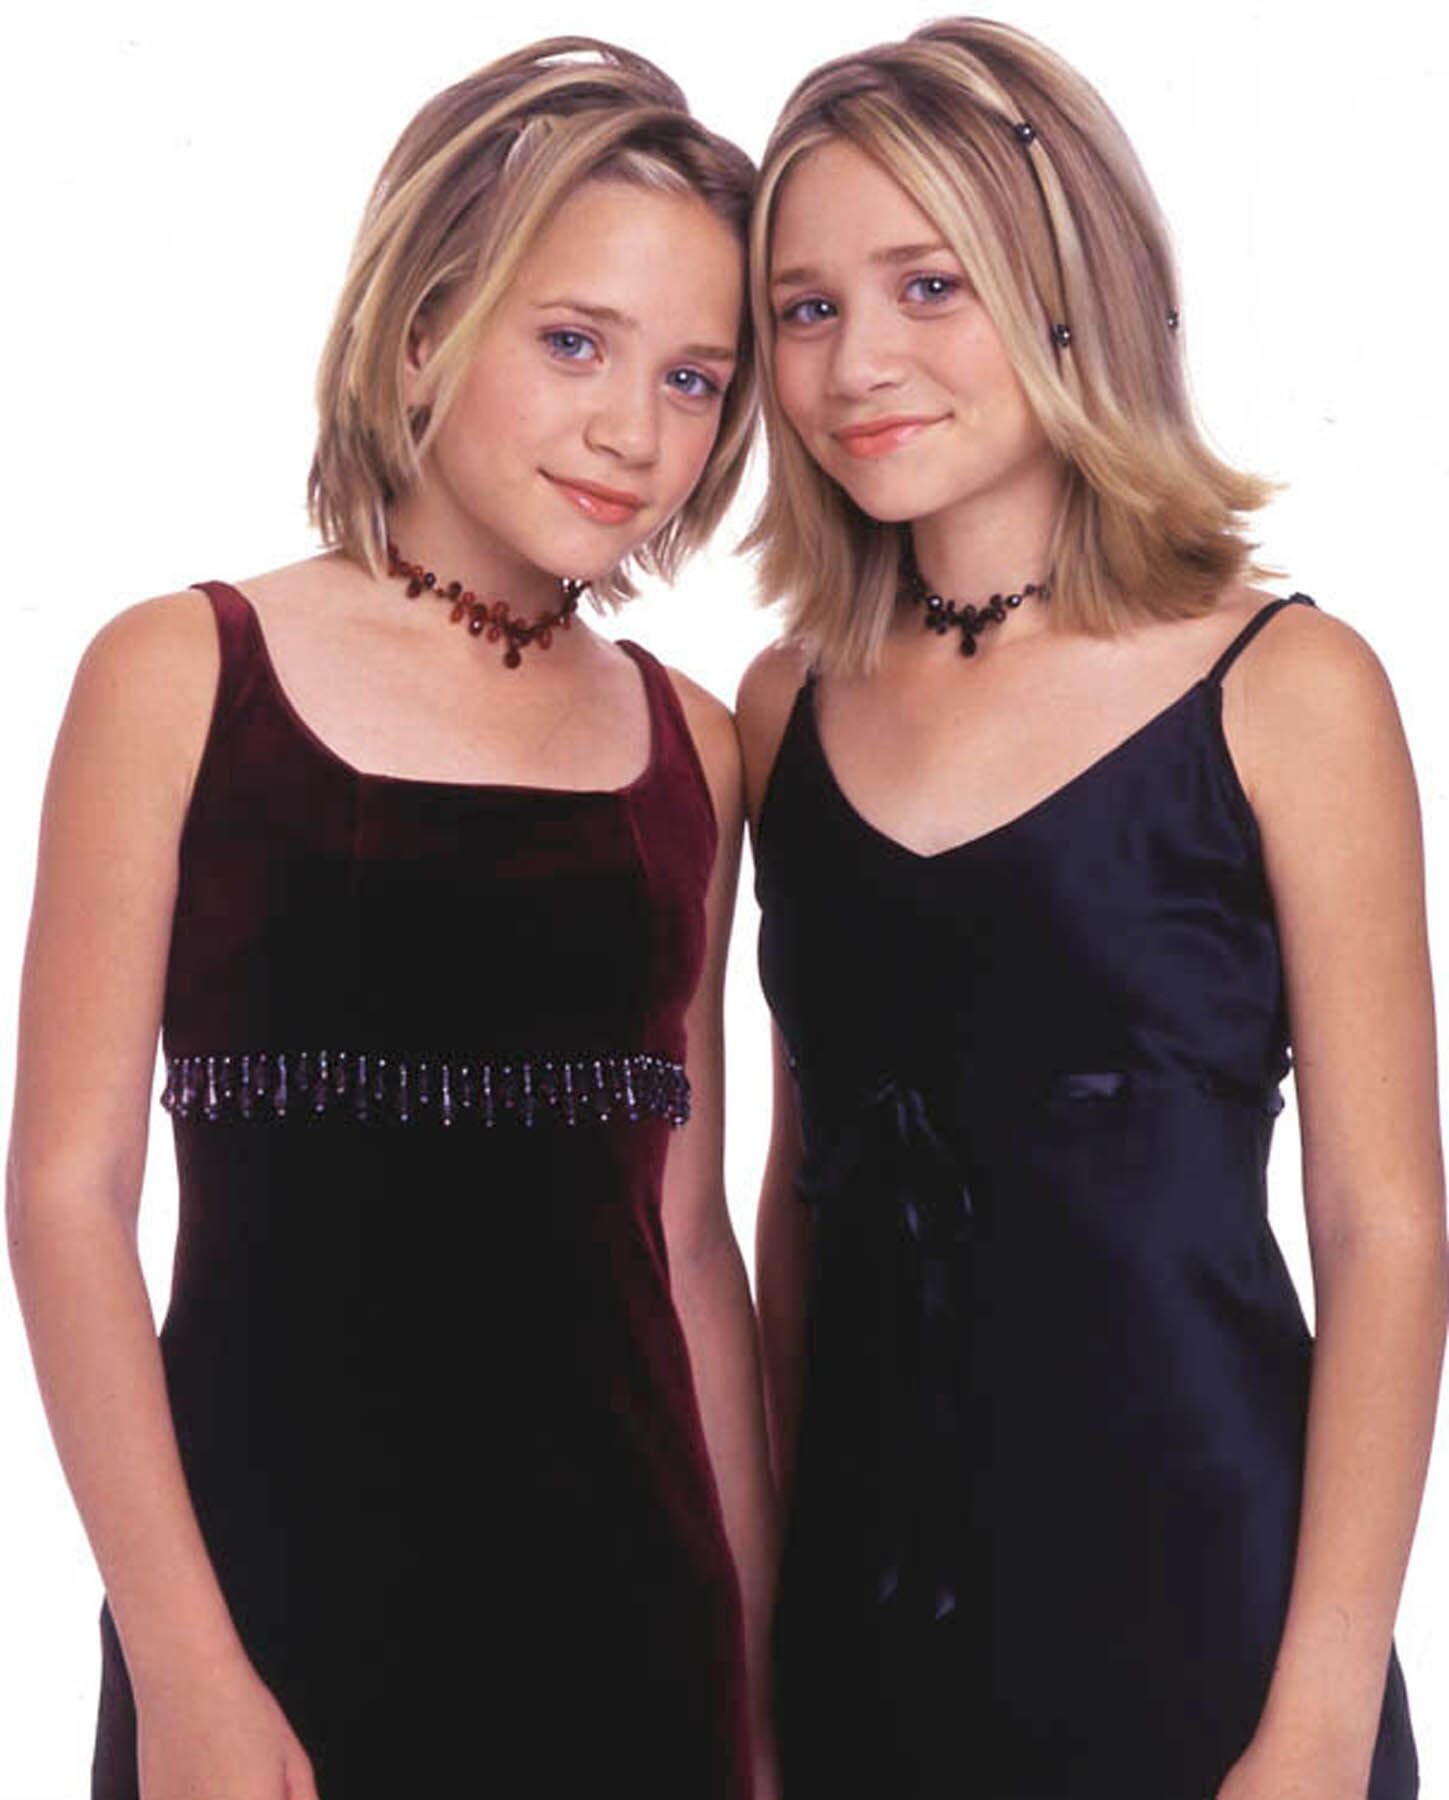 Identical twin actresses Mary-Kate and Ashley Olsen in 2000 | Source: Getty Images